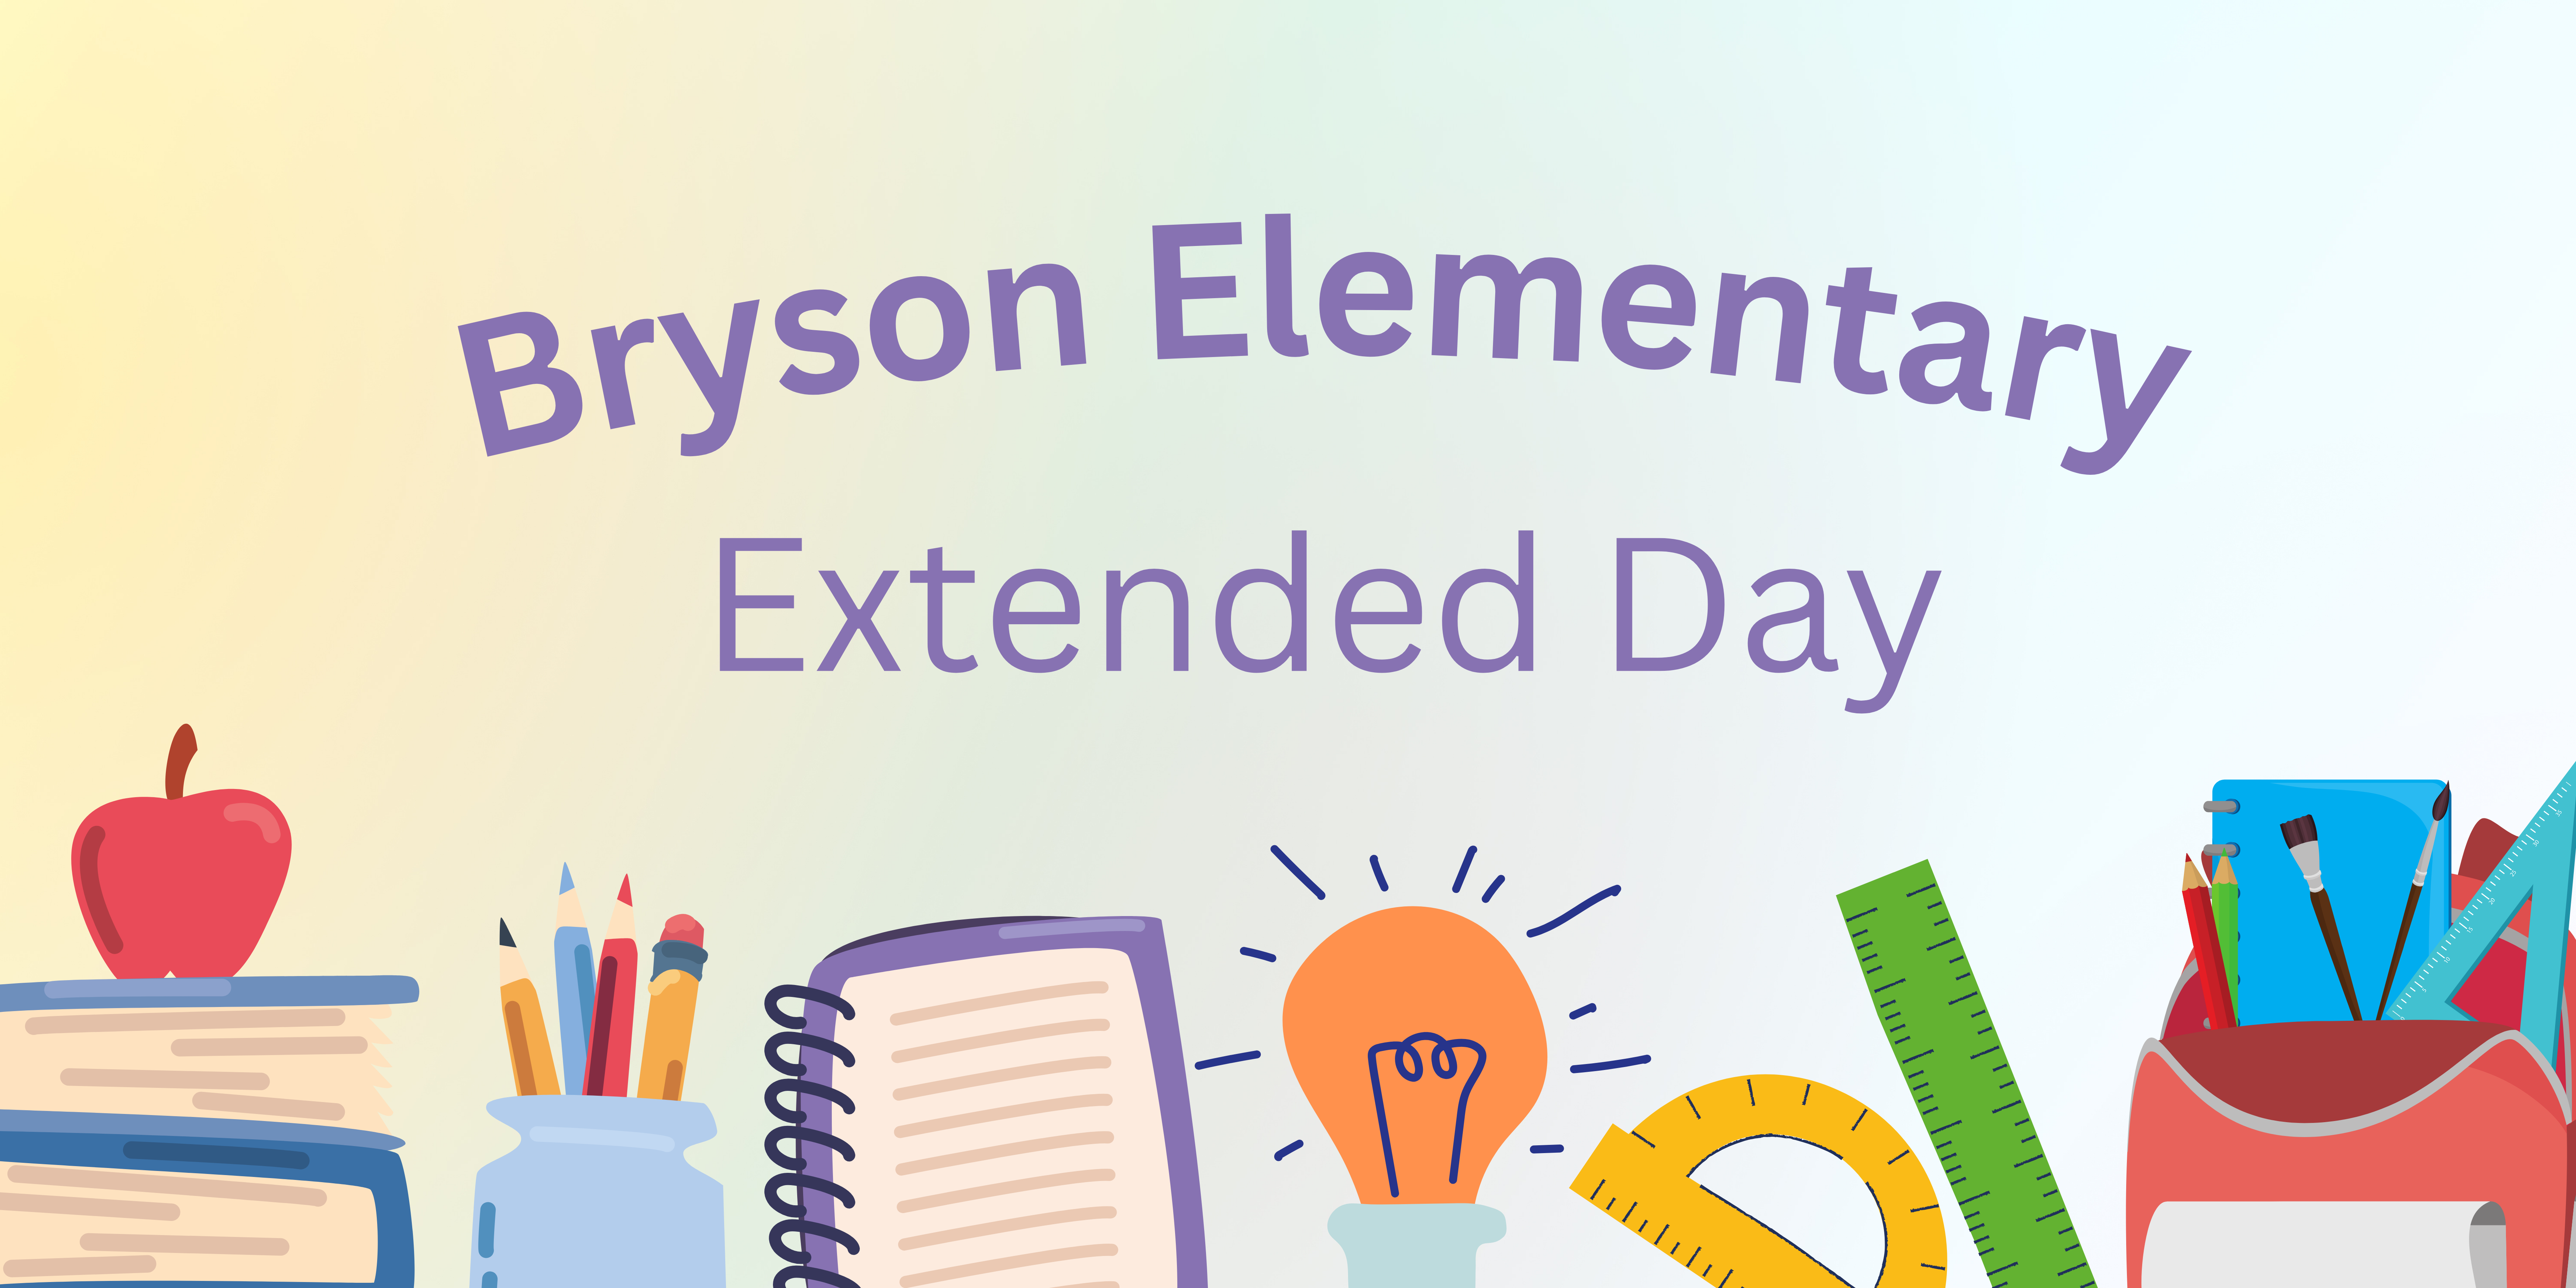 Bryson Elementary Extended Day 